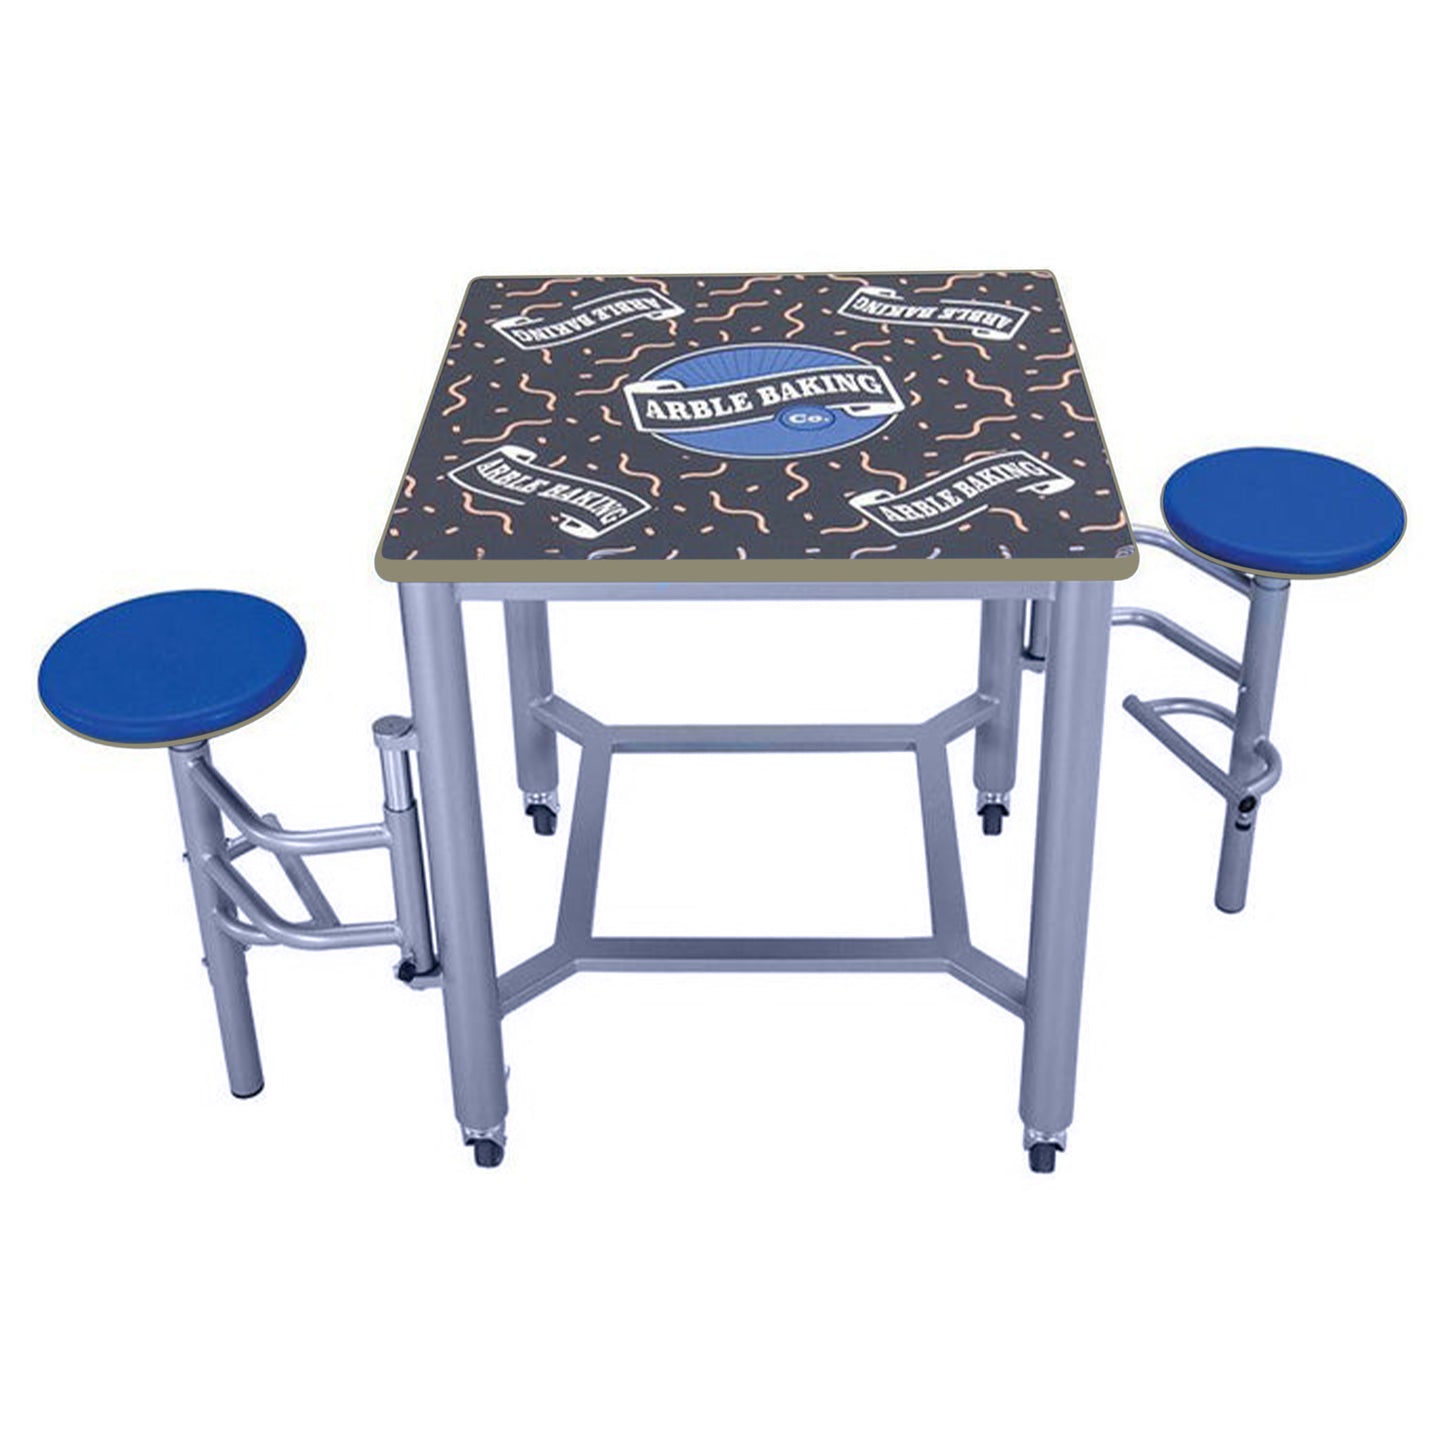 AmTab Mobile Stool Table - Double Collaboration High Table - 36"W x 36"L x 42"H/30"H Seat - 2 Stools  (AMT-MDST3636-42)